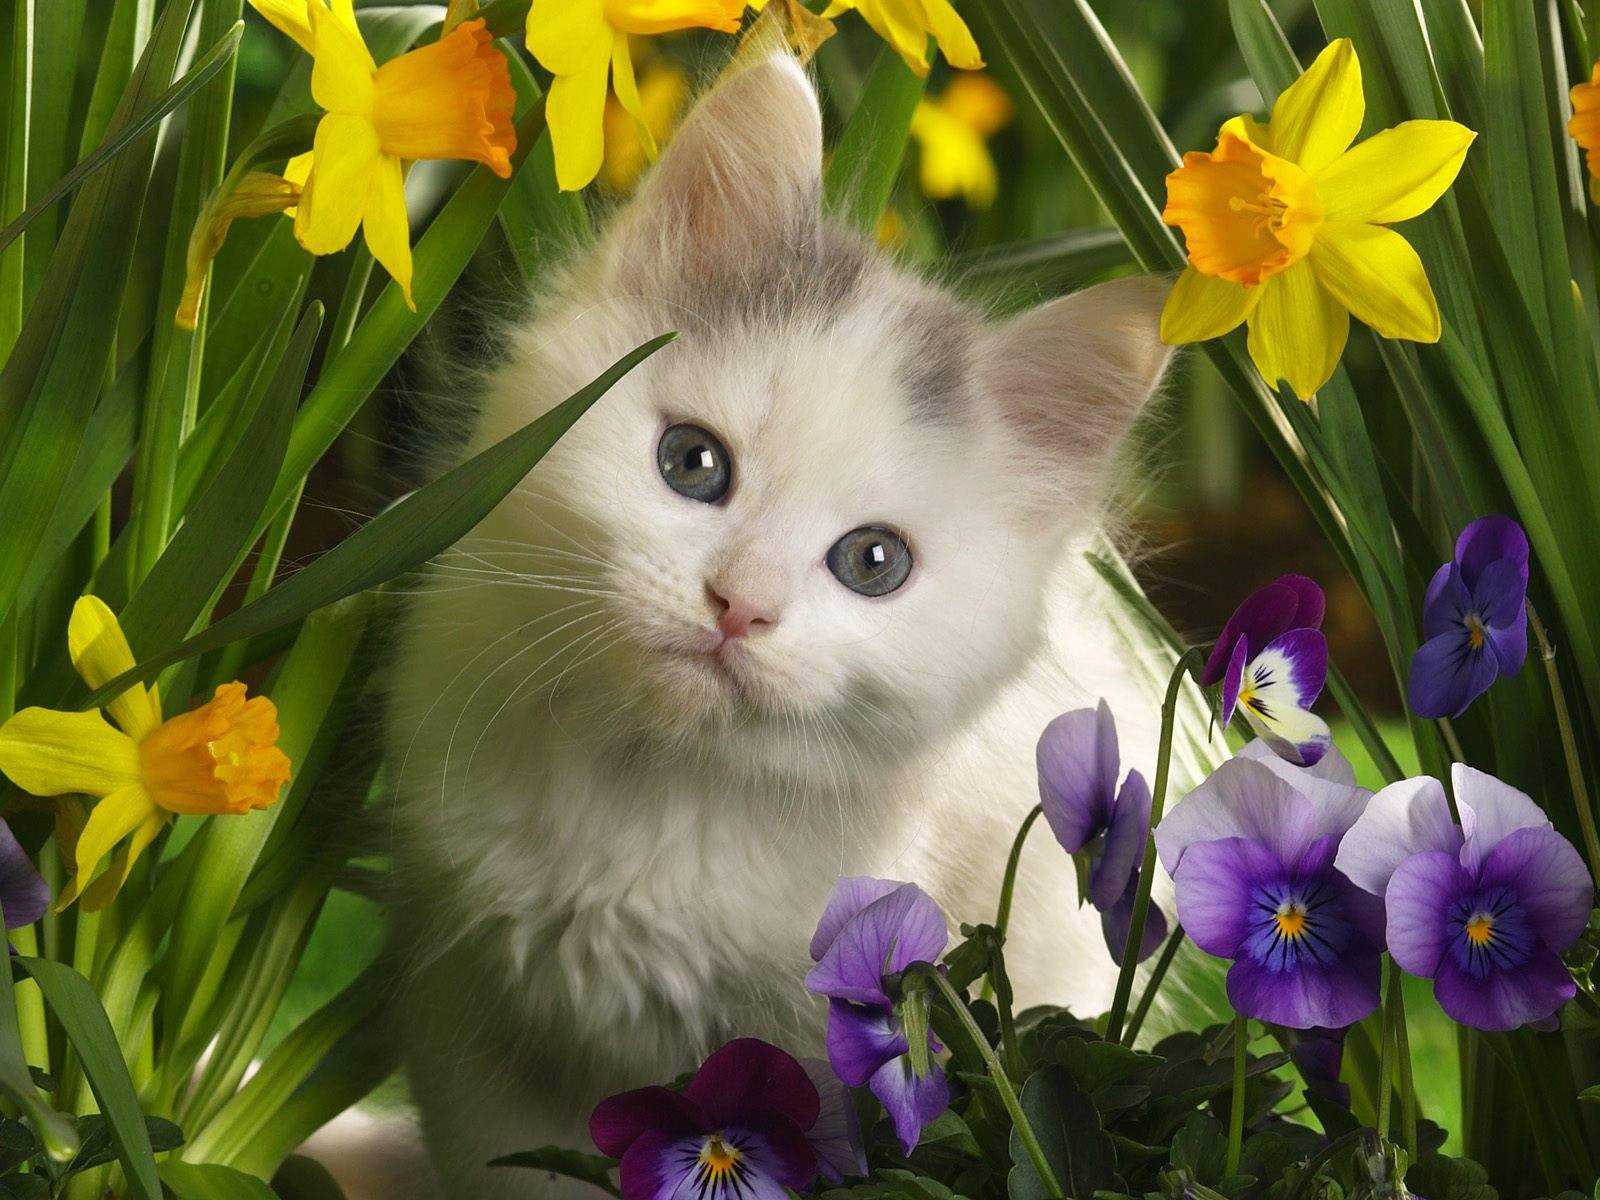 All Wallpapers Beautiful Cats Hd Wallpapers